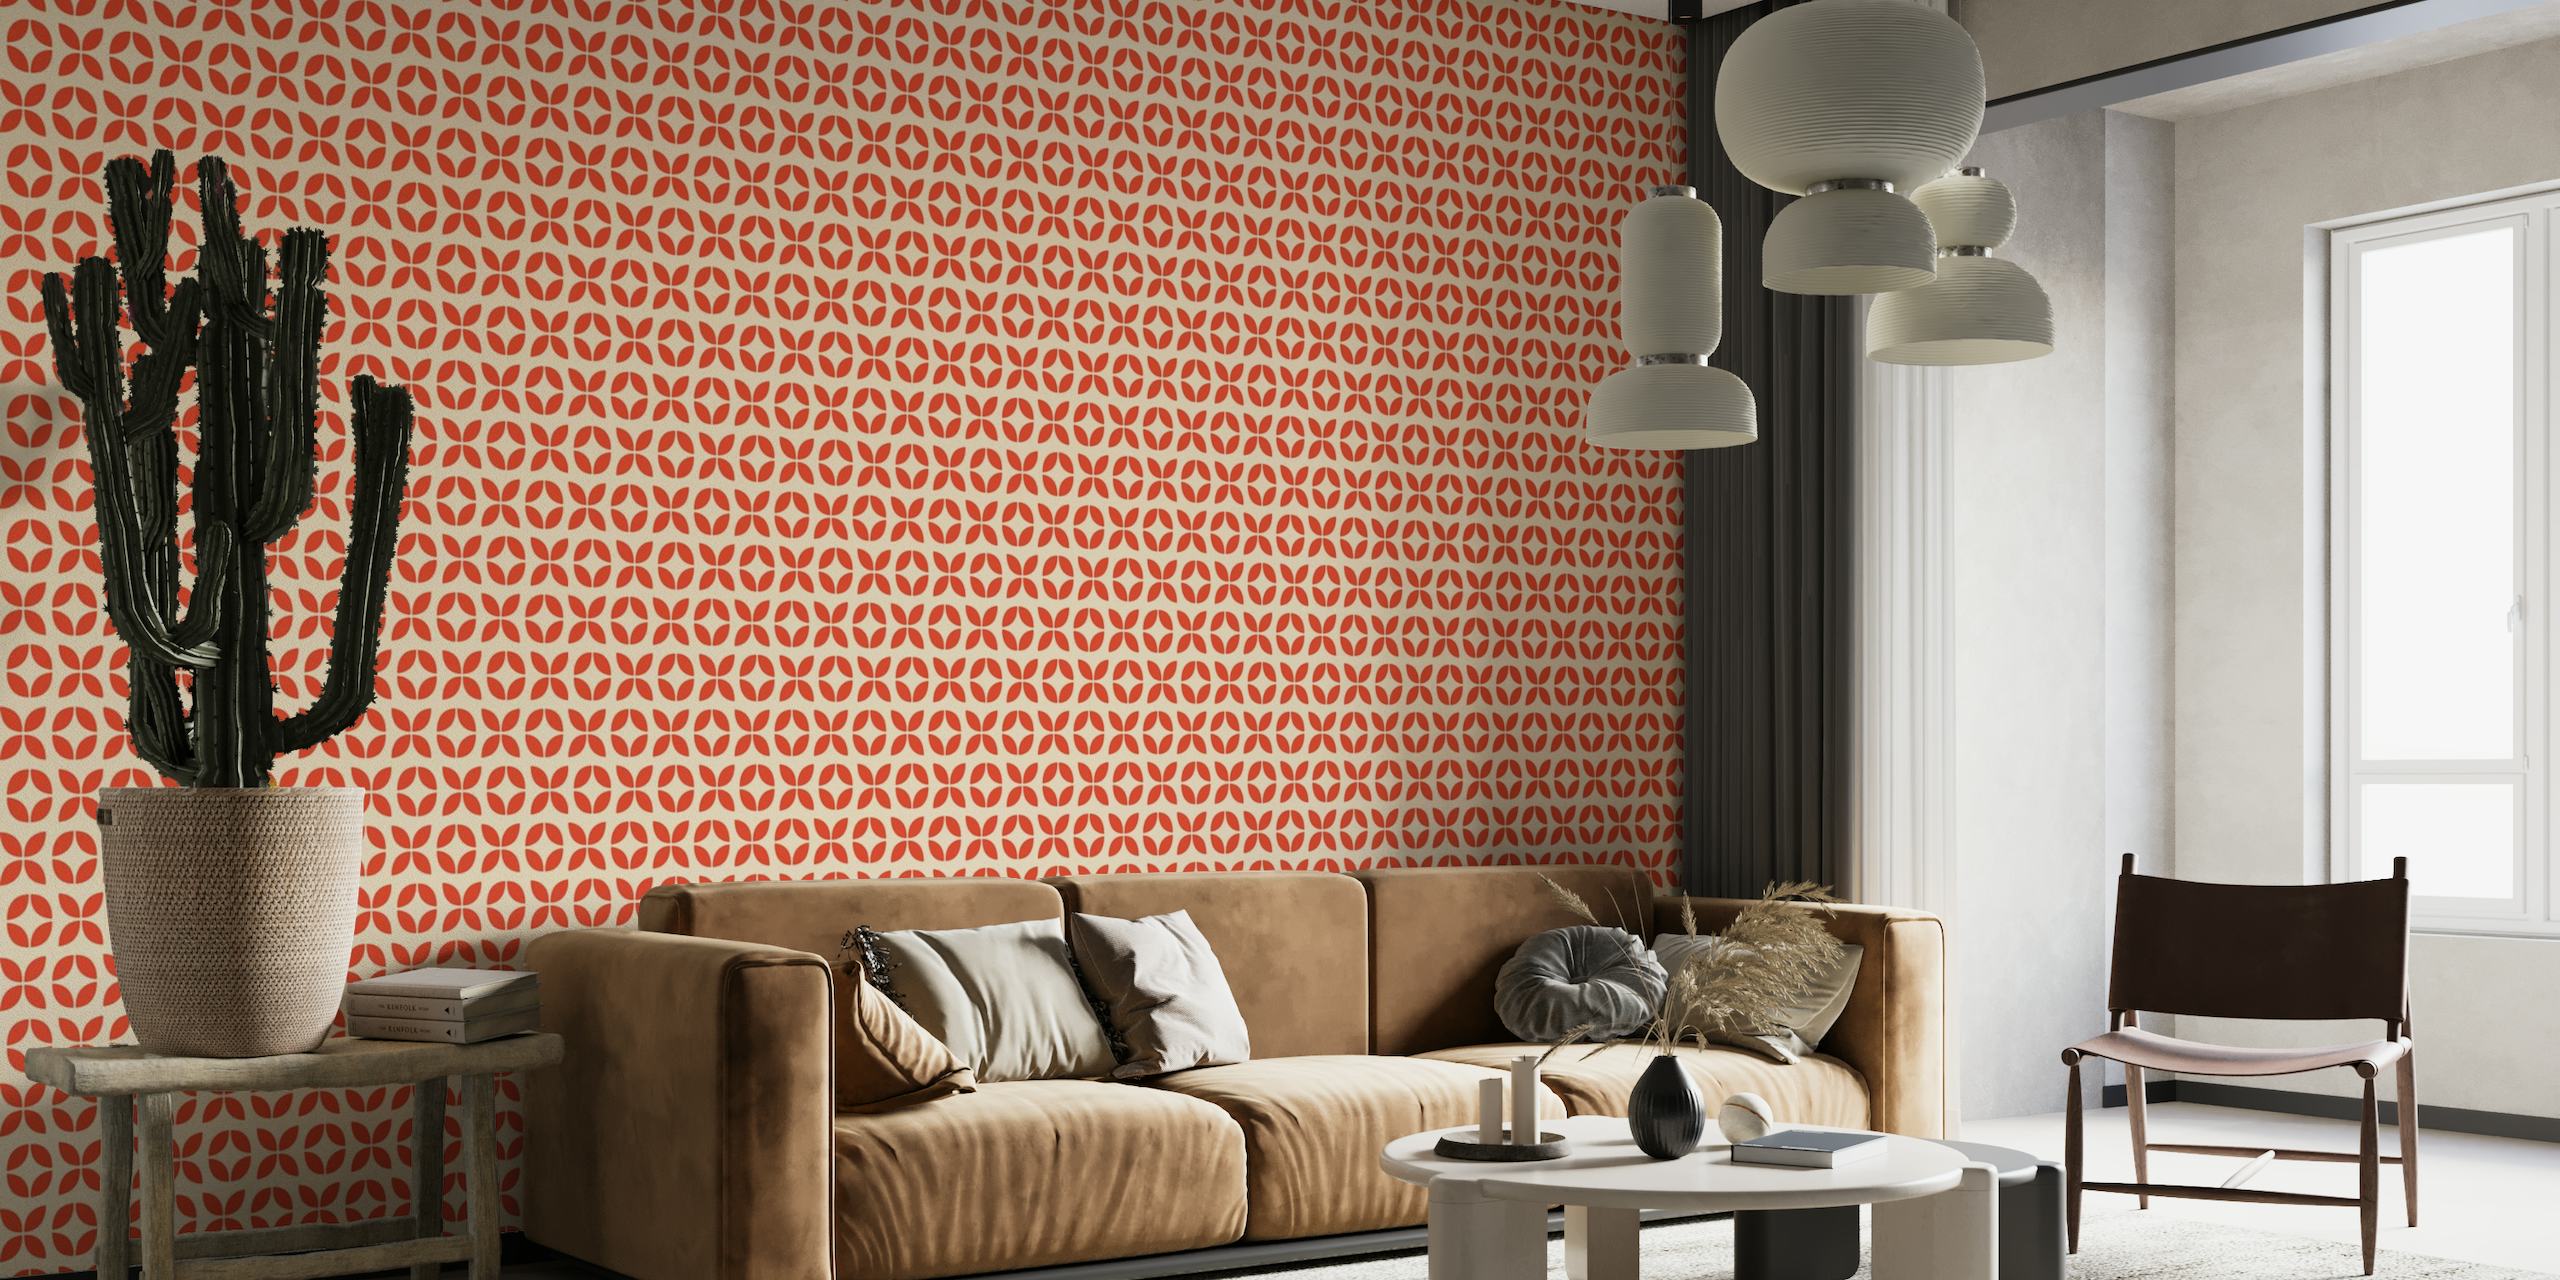 Mid Century Shapes in Red wallpaper